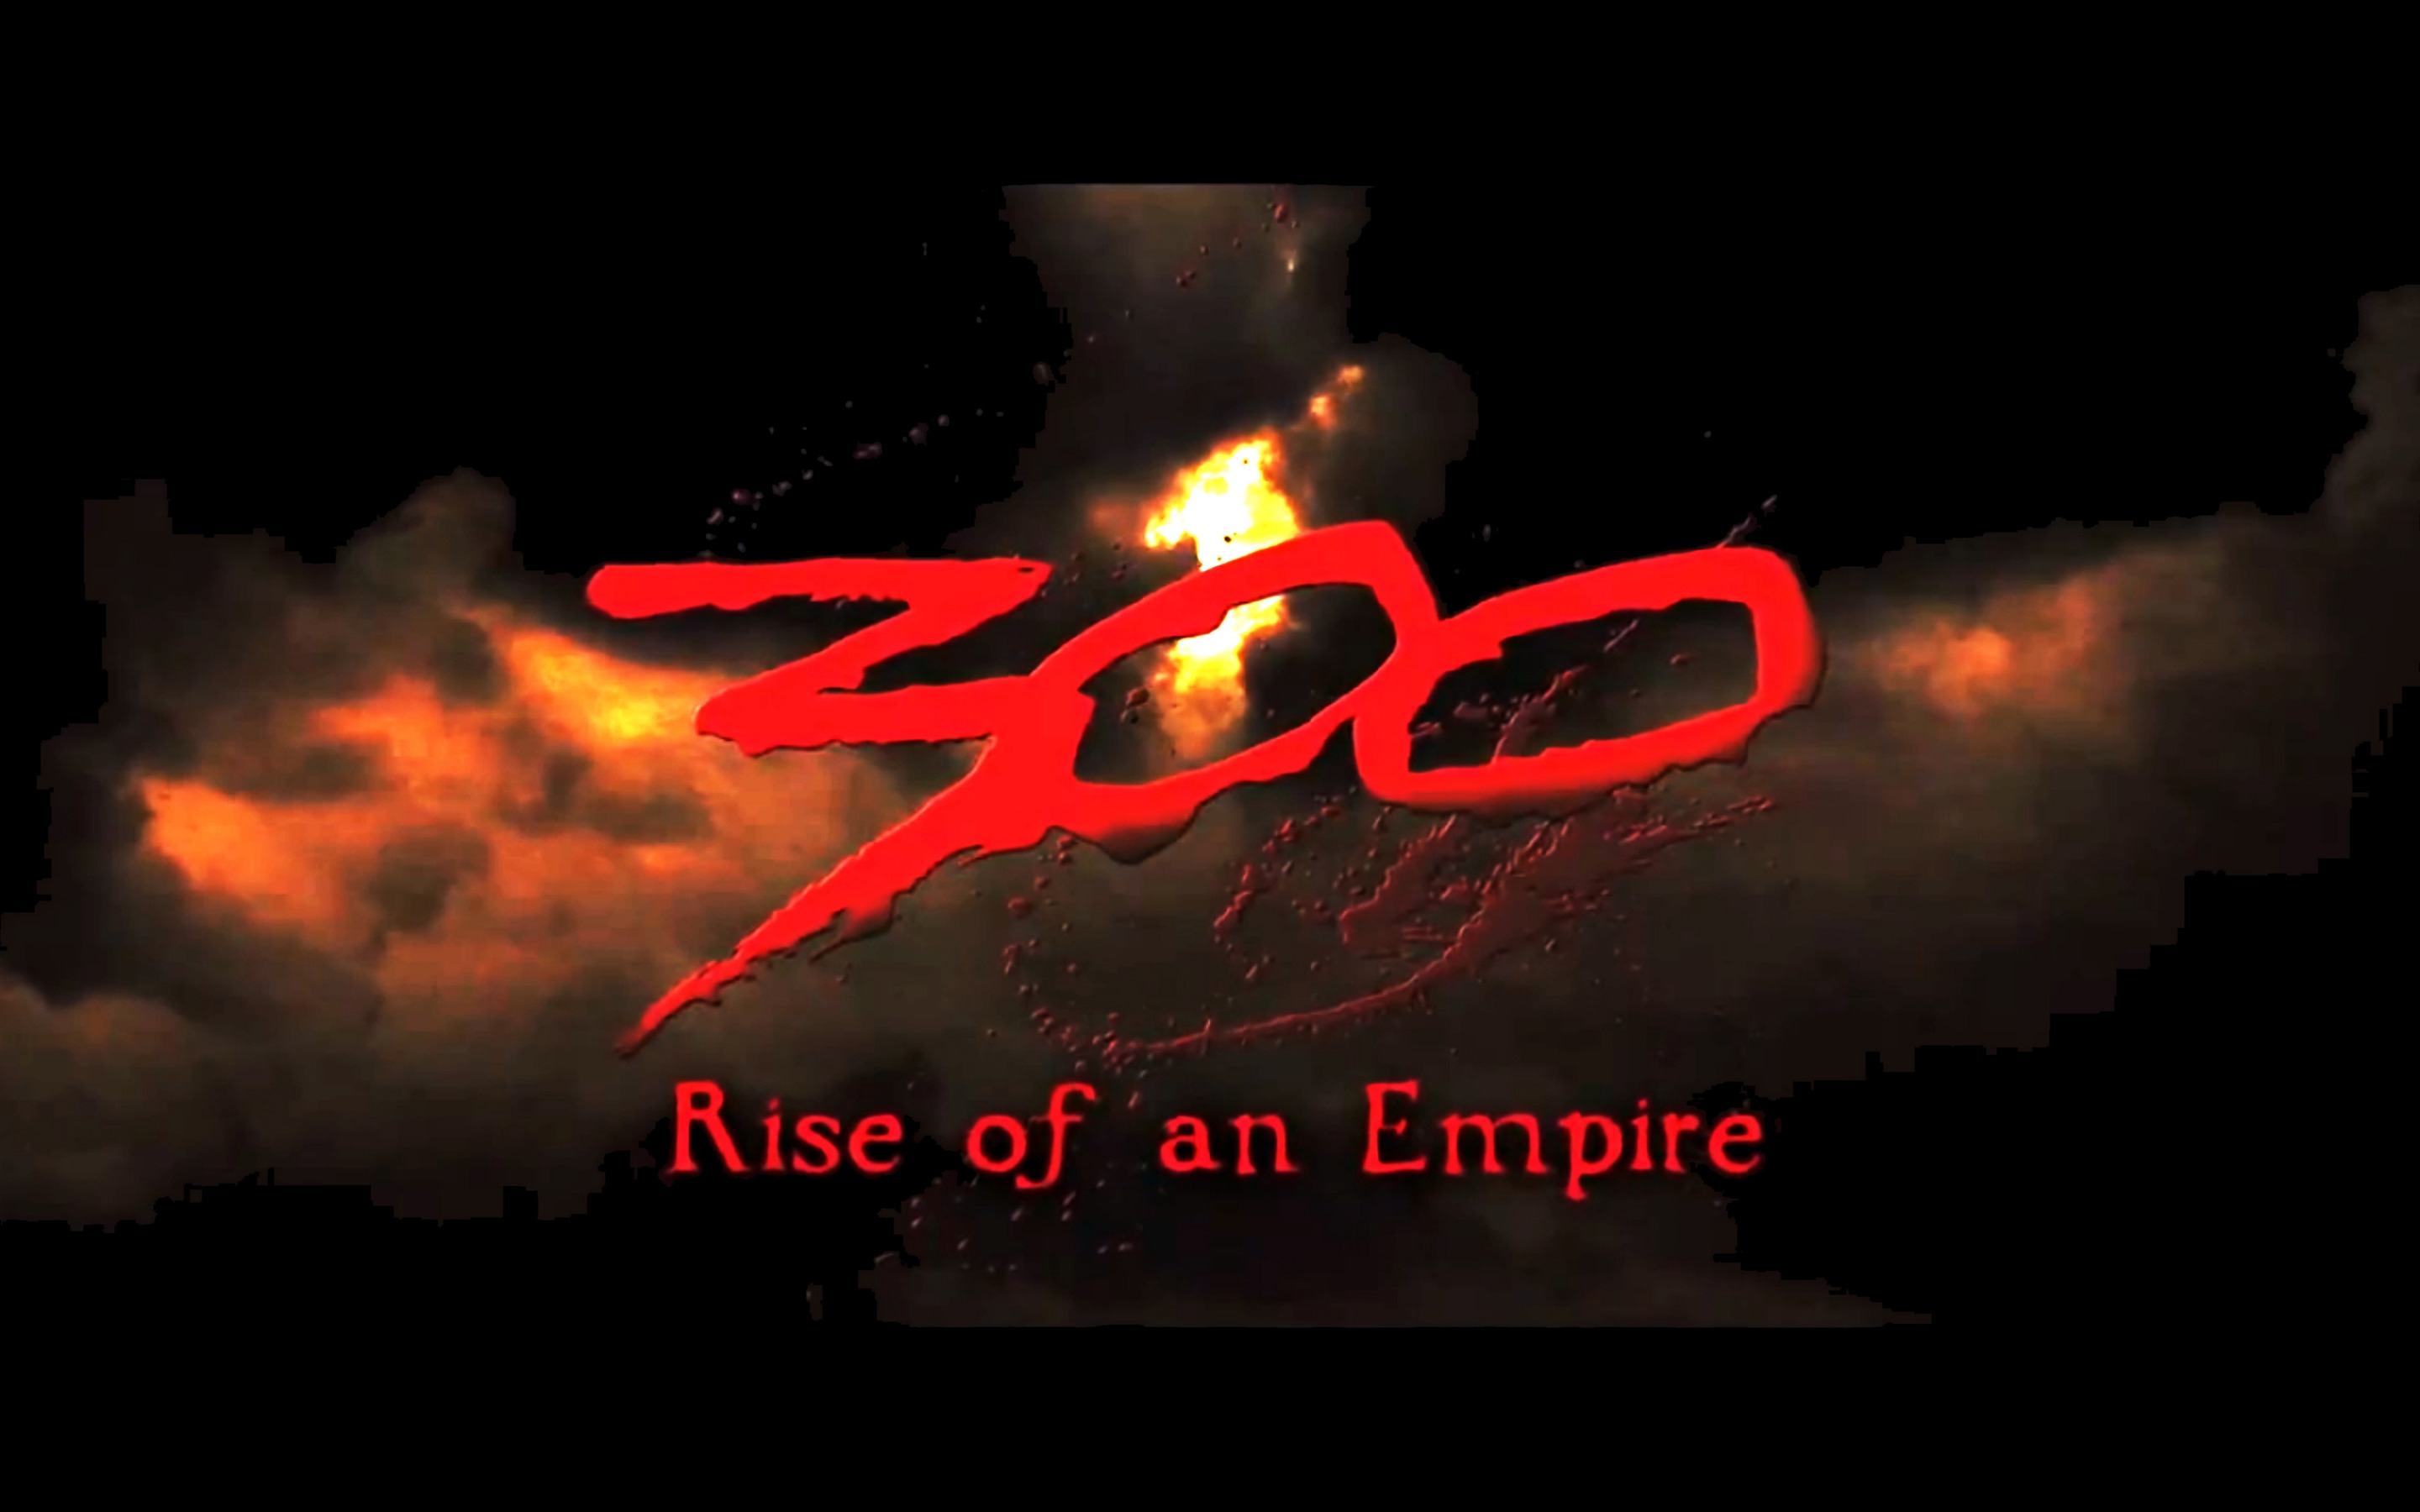 300 Rise of an Empire 2014 for 2880 x 1800 Retina Display resolution